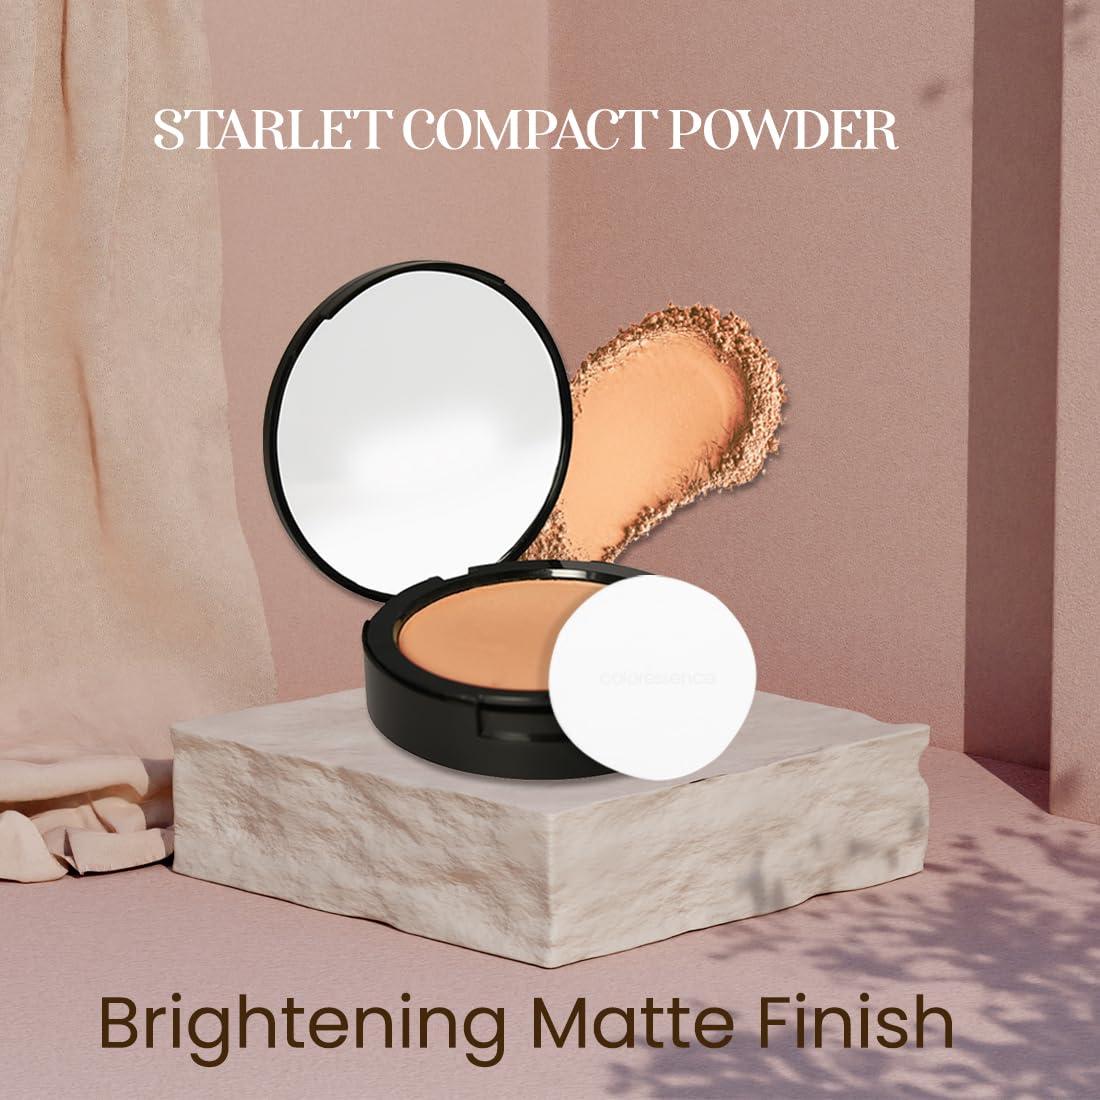 COLORESSENCE Starlet Compact Powder with Free Applicator Puff | Makeup Setting Powder | Makeup Baking Powder | Matte Compact Powder |Lightweight | Oil Control Face Powder | Suitable for All Skin Types | Snow White 